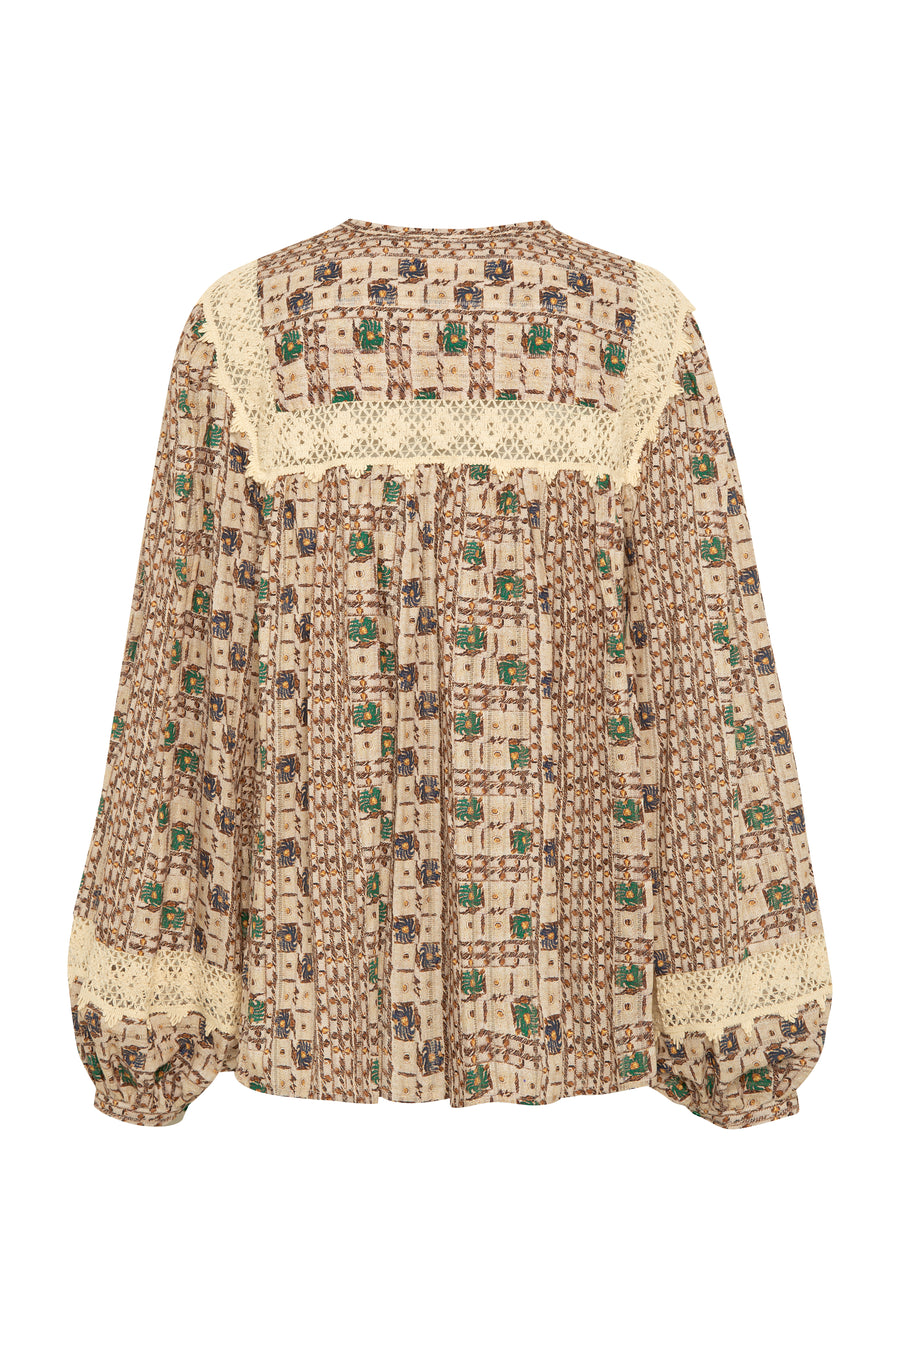 PIKO - Lace-trimmed blouse with crochet flower details